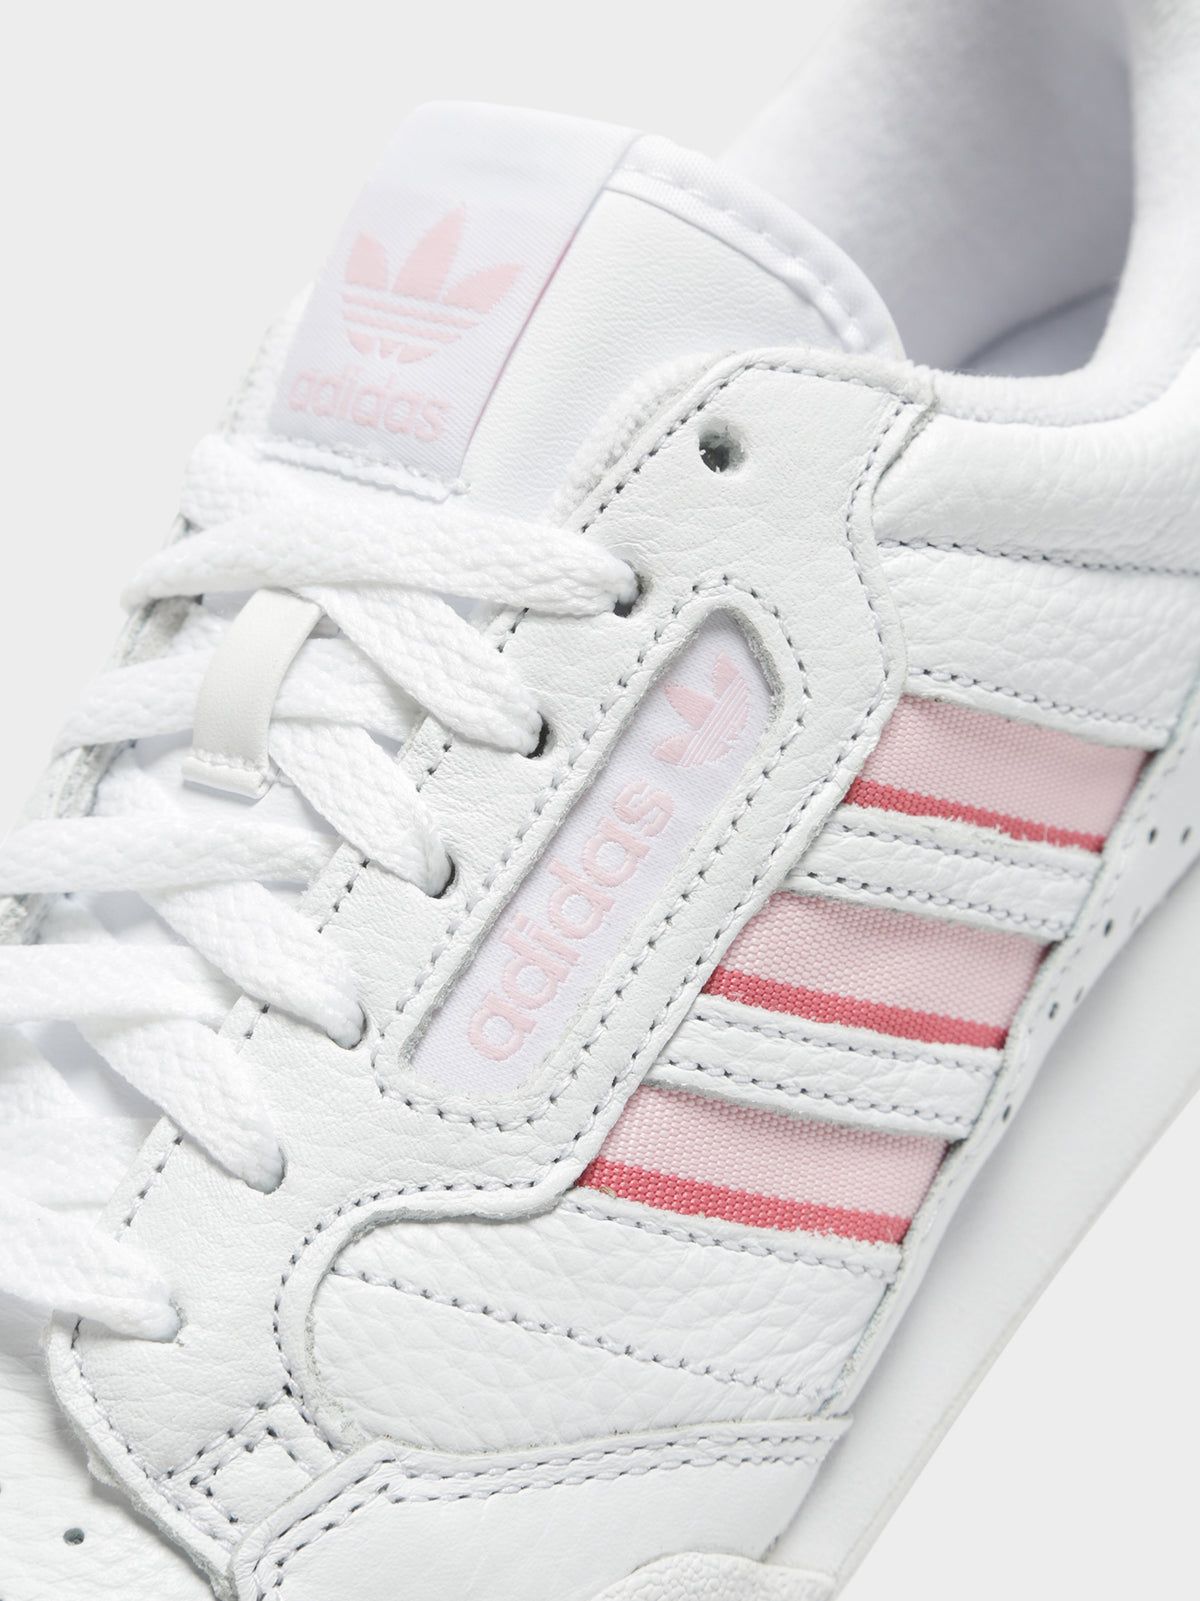 Womens Continental 80 Sneakers in Cloud White / Clear Pink / Hazy Rose